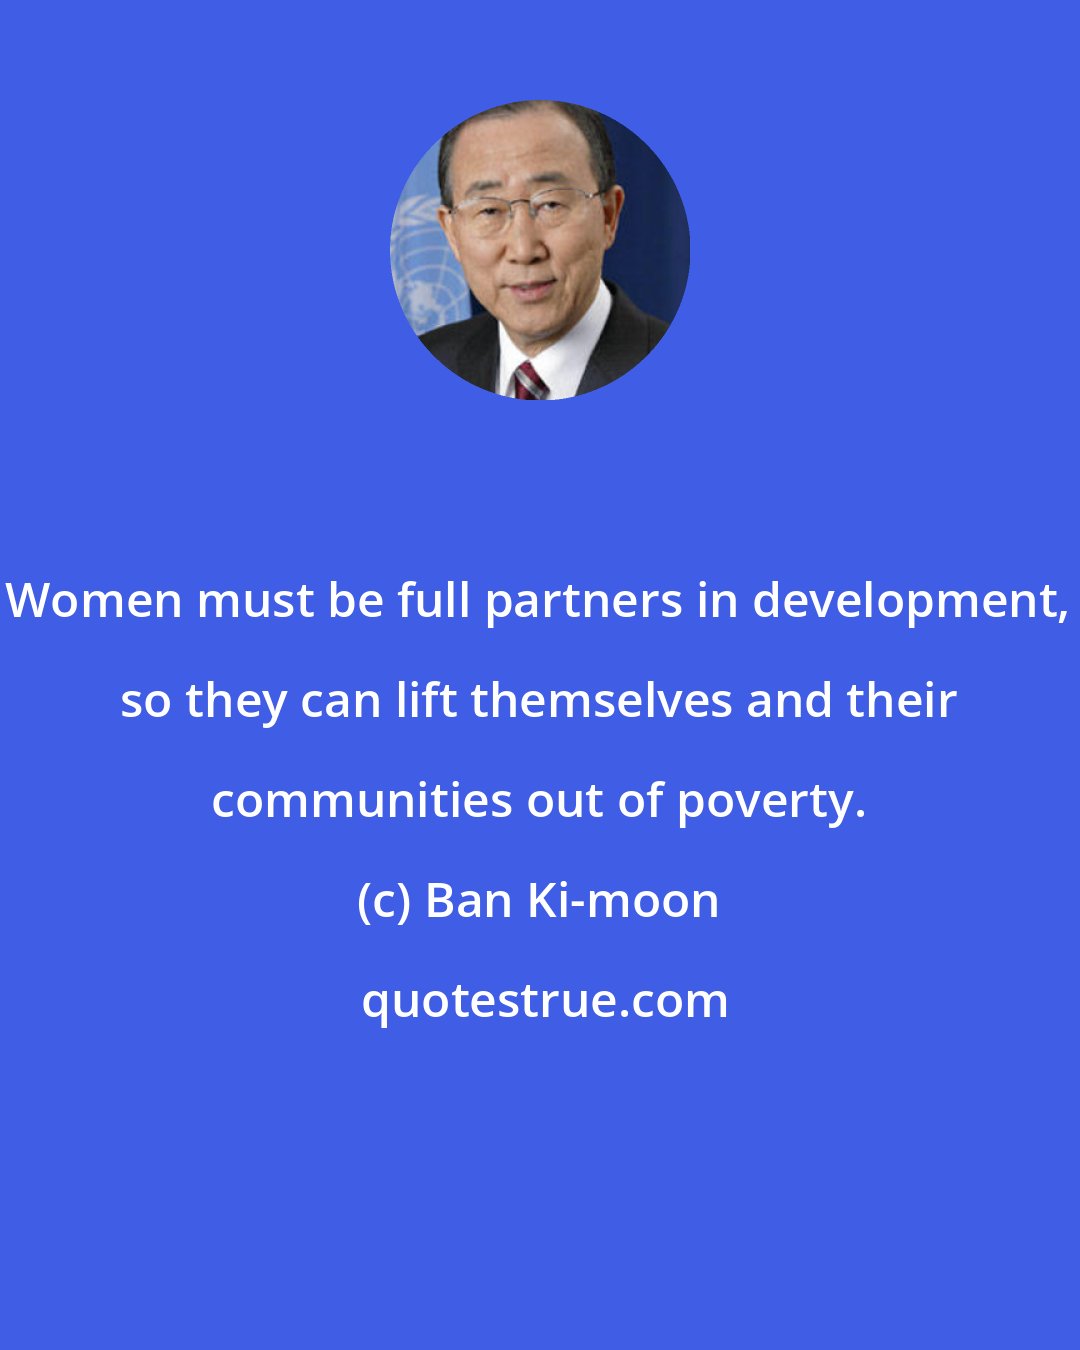 Ban Ki-moon: Women must be full partners in development, so they can lift themselves and their communities out of poverty.